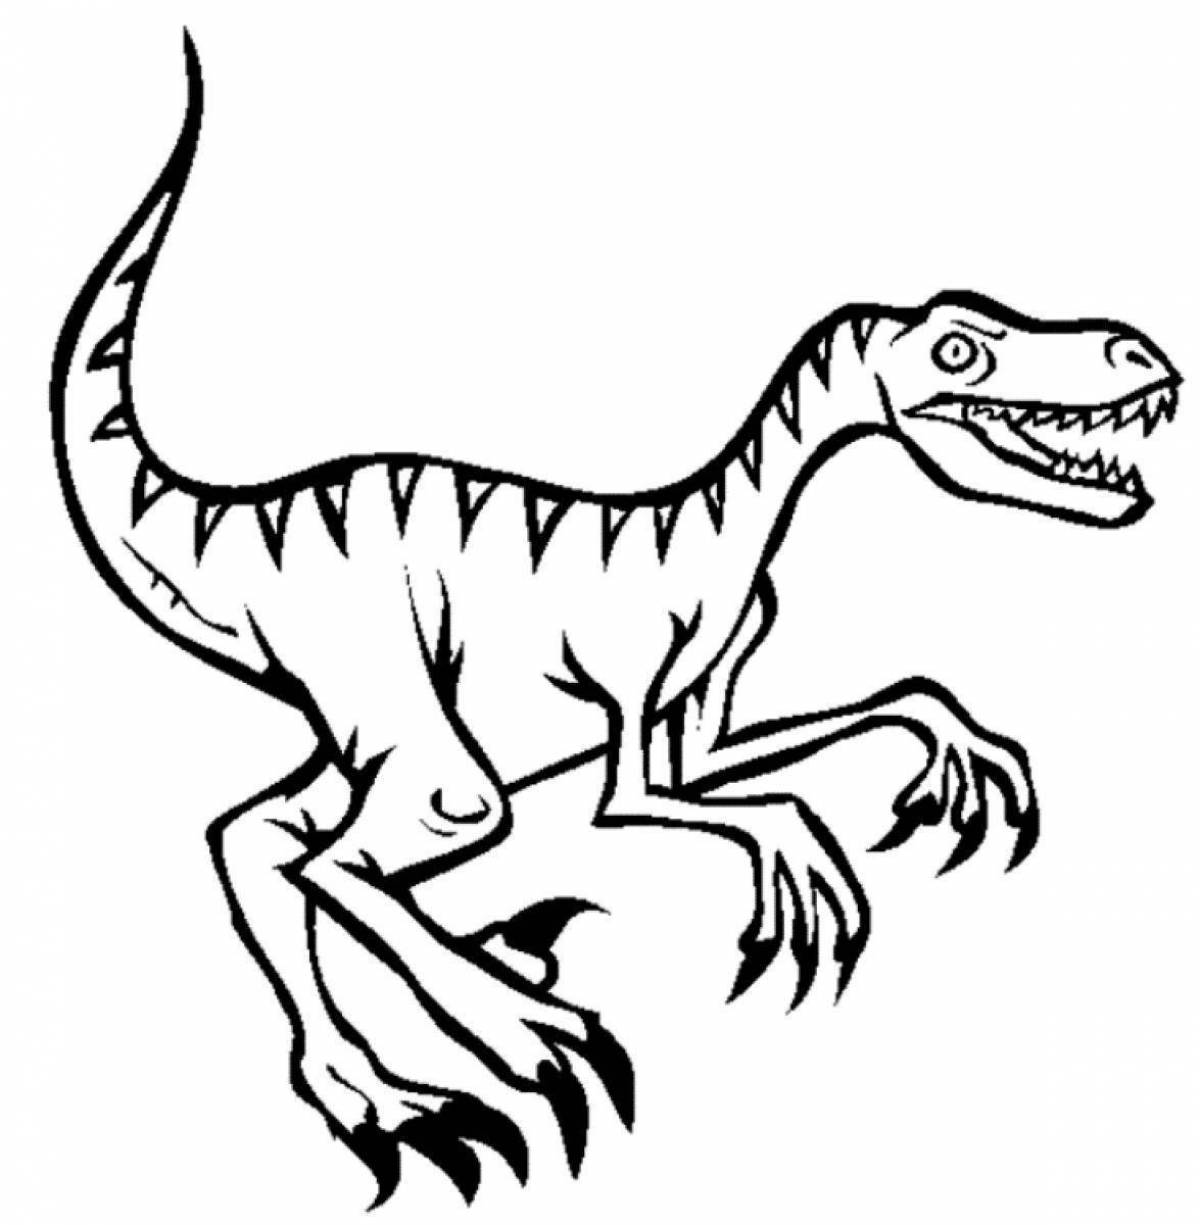 Coloring page glowing velociraptor